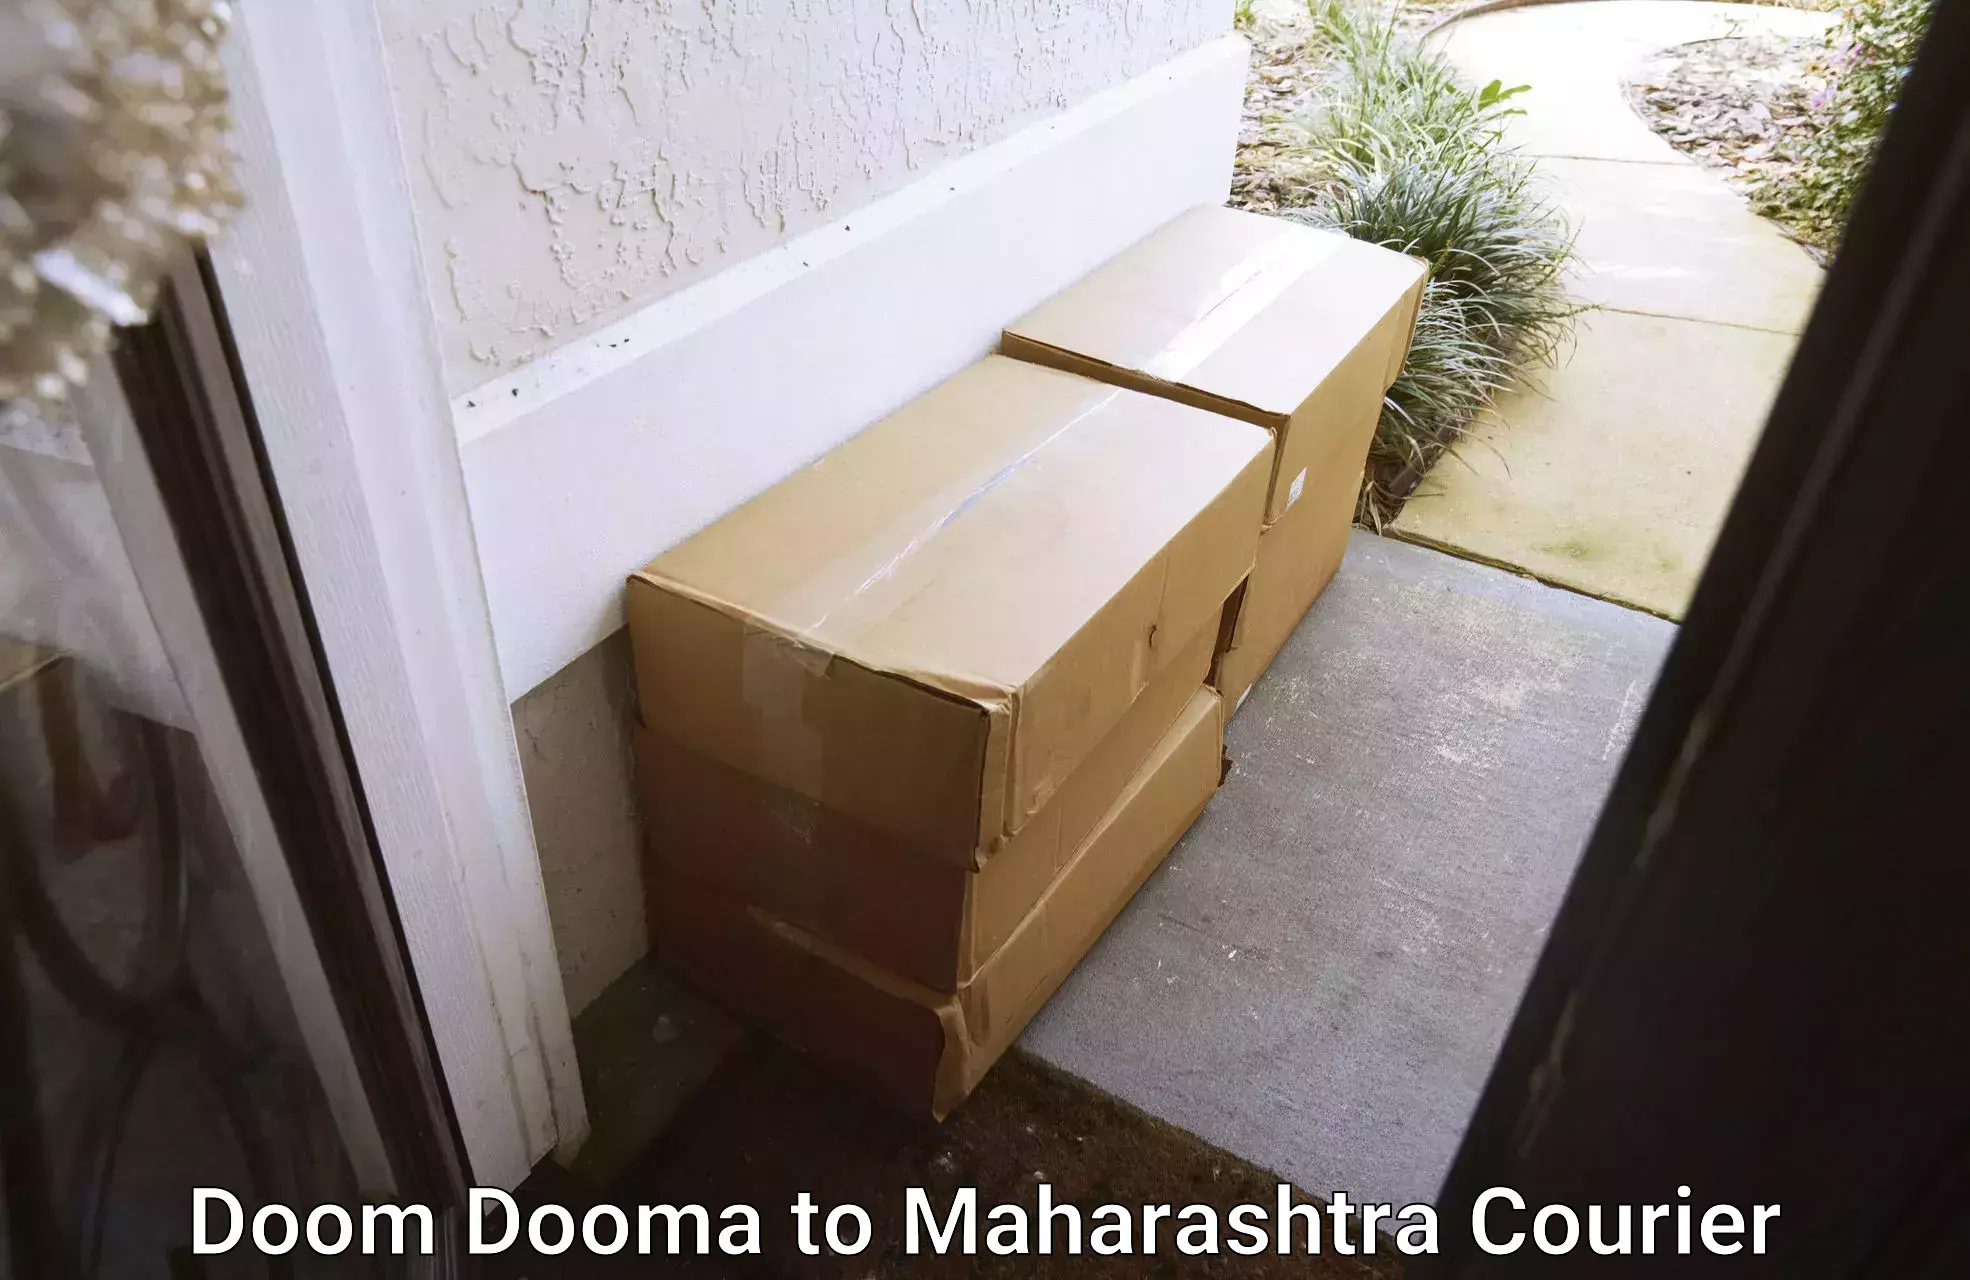 Air courier services Doom Dooma to Bhoom